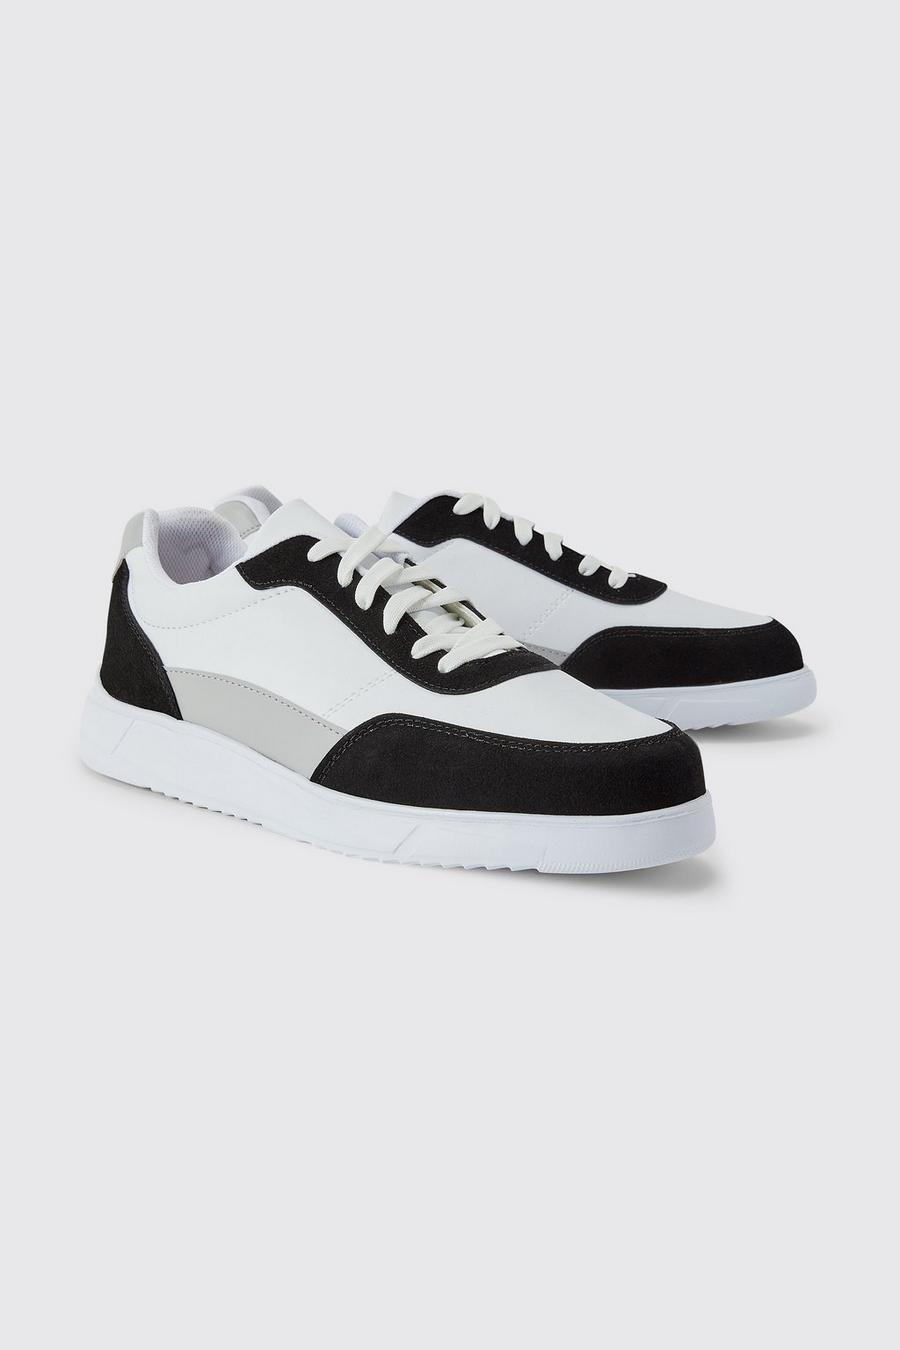 Black Tonal Panelled Faux Leather Trainer